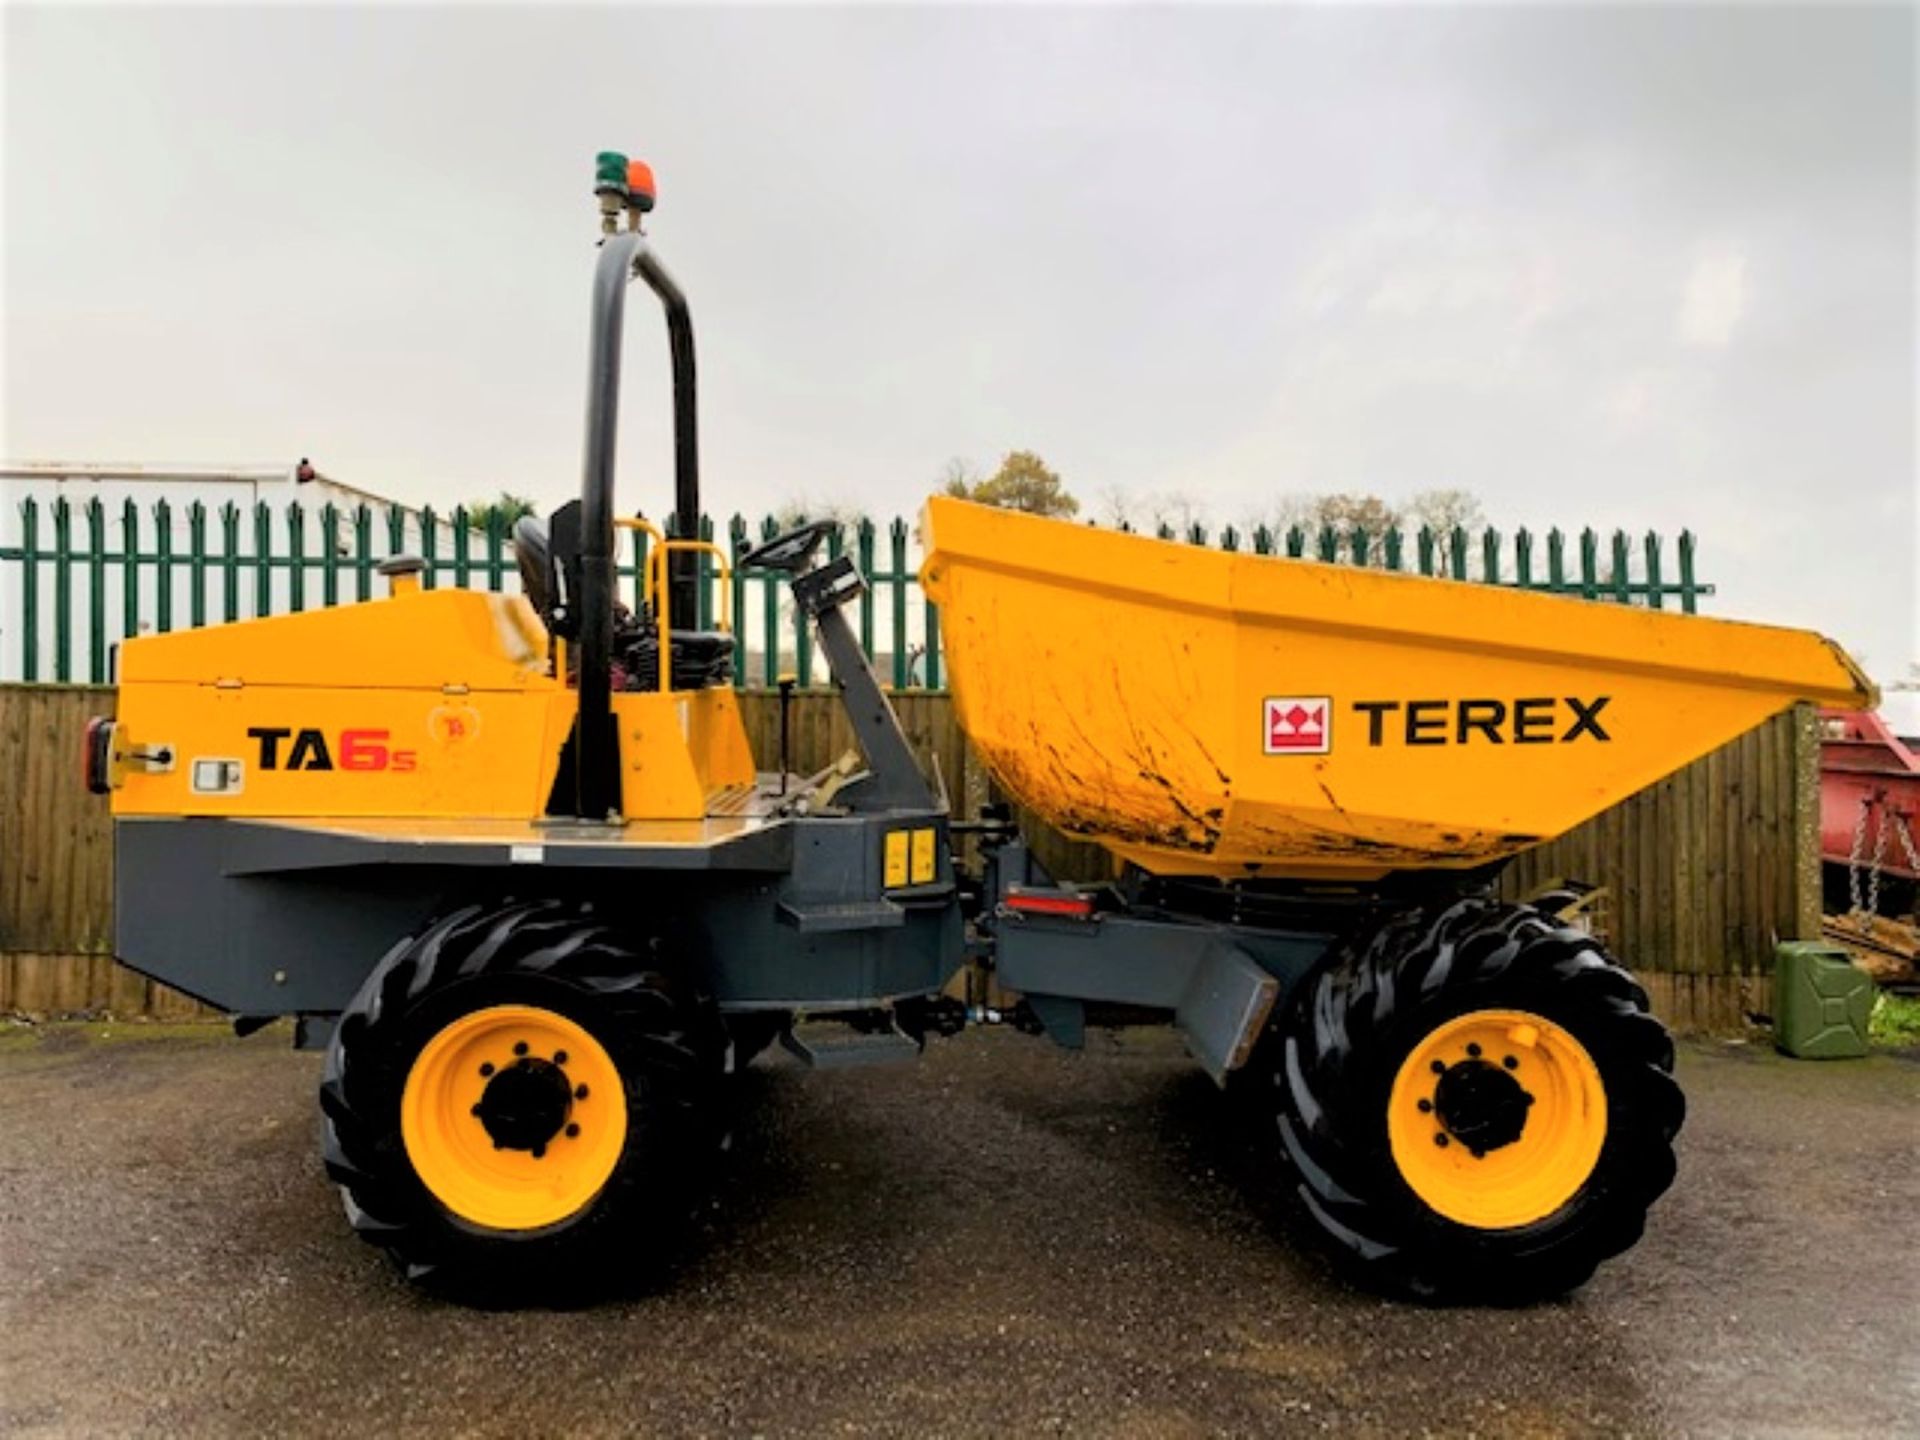 TEREX TA6 S SWIVEL DUMPER, YEAR 2017, 680 HOURS, GOOD TYRES, ORANGE AND GREEN BEACONS, CE MARKED - Image 6 of 12